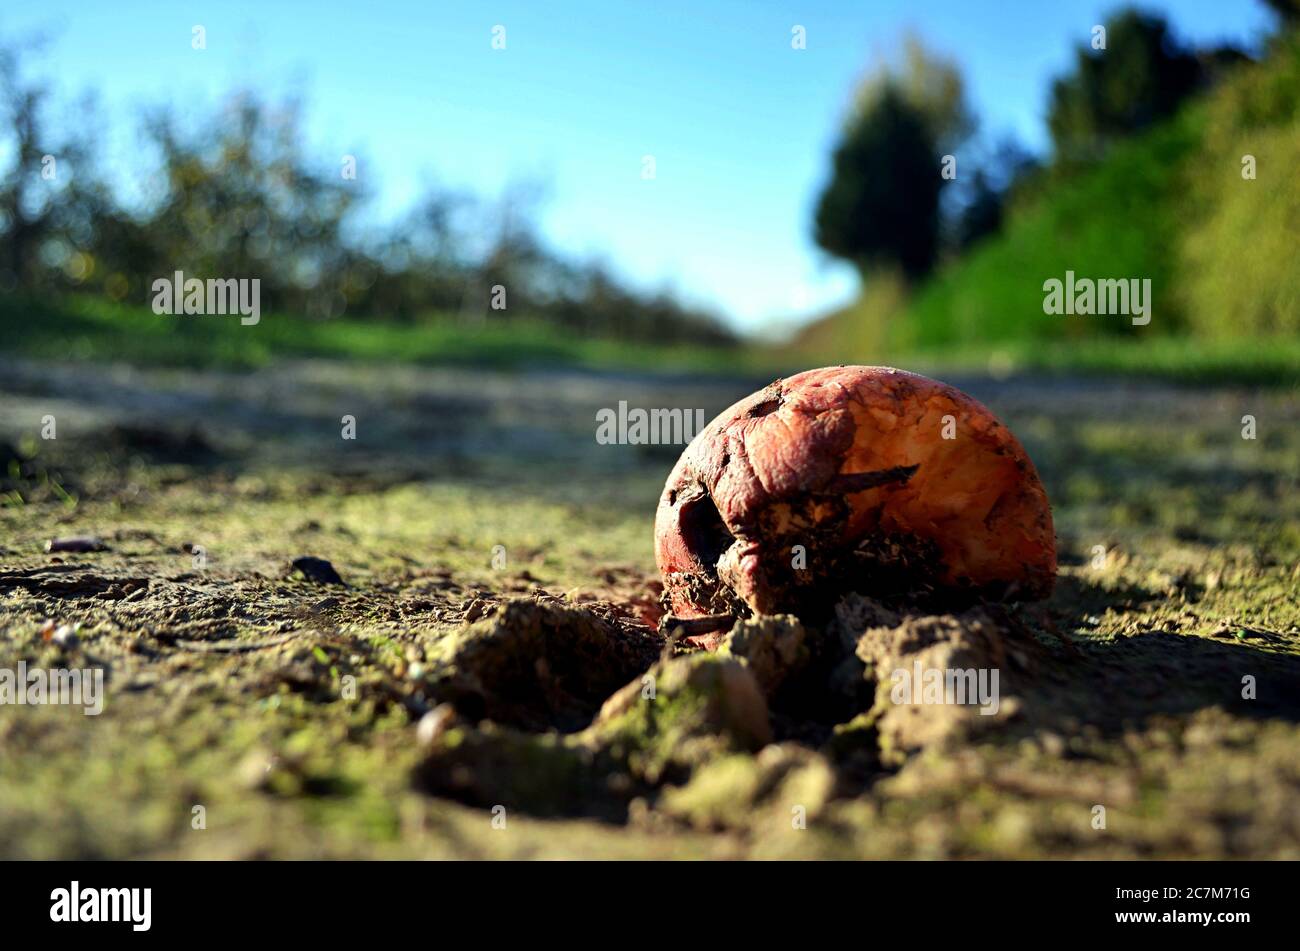 Closeup shot of a rotten and half-eaten apple on the ground Stock Photo